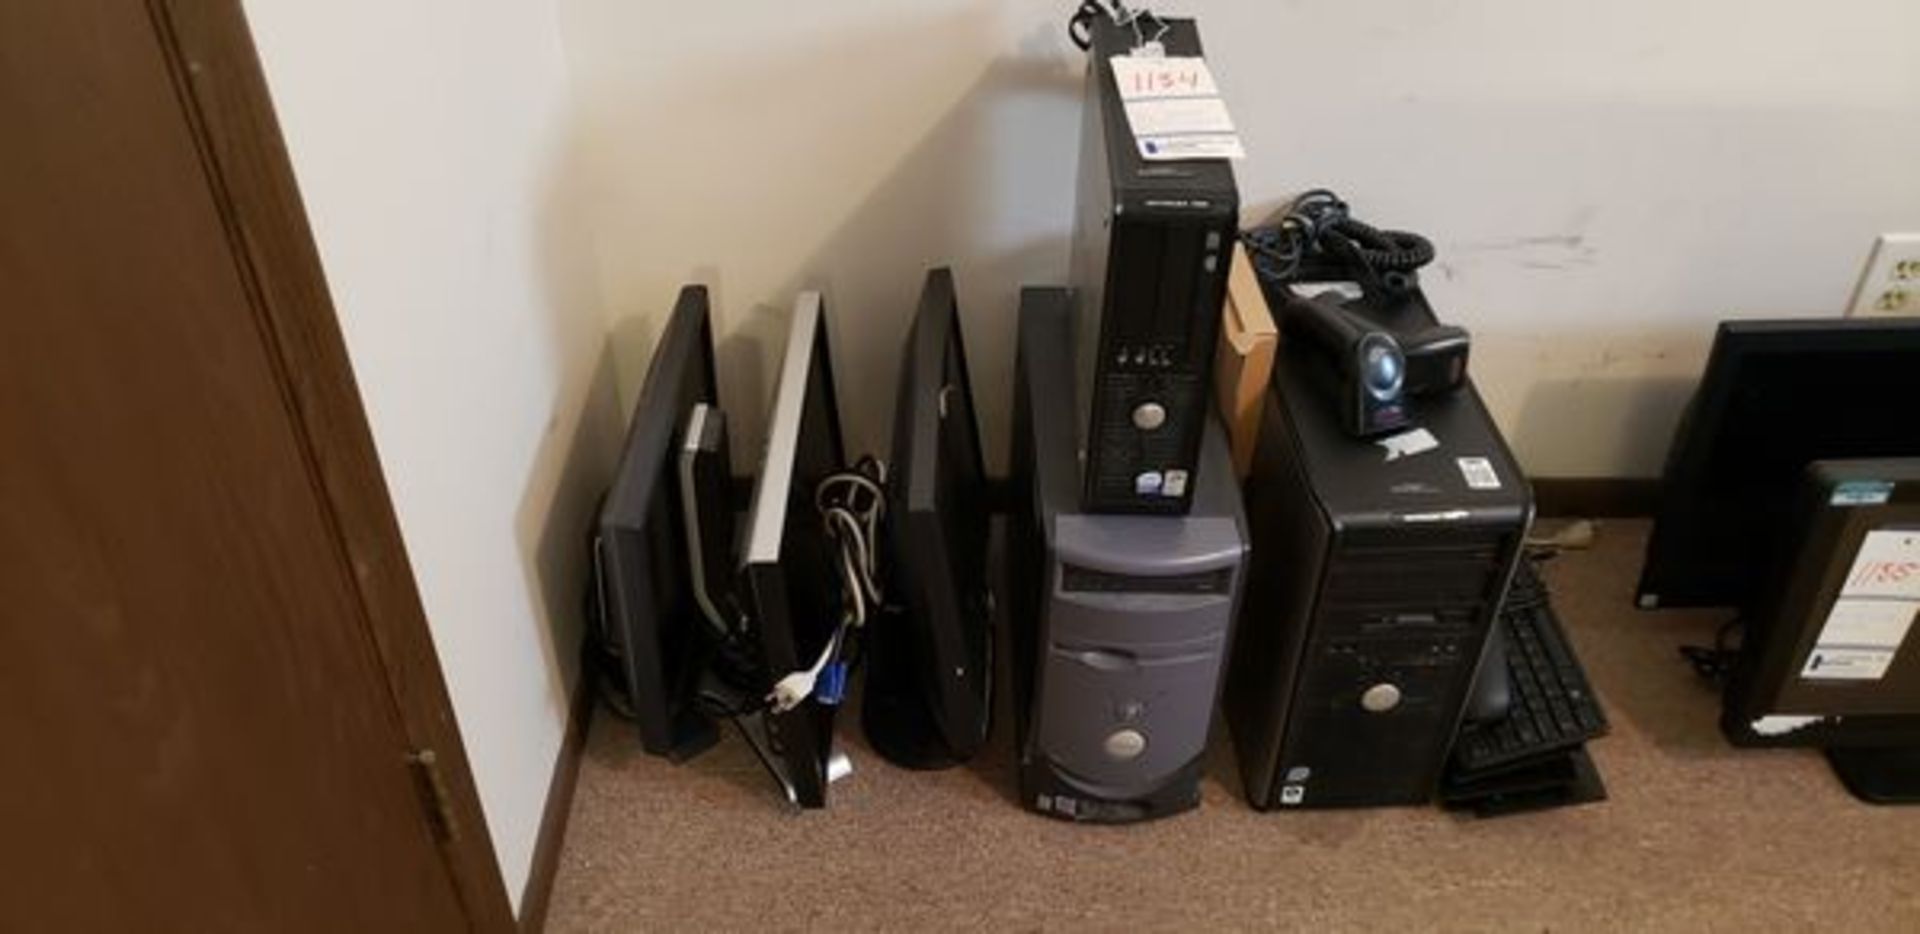 3 ASSORTED DESKTOP COMPUTERS WITH MONITORS, KEYBOARDS, MICE, AND SCANNER